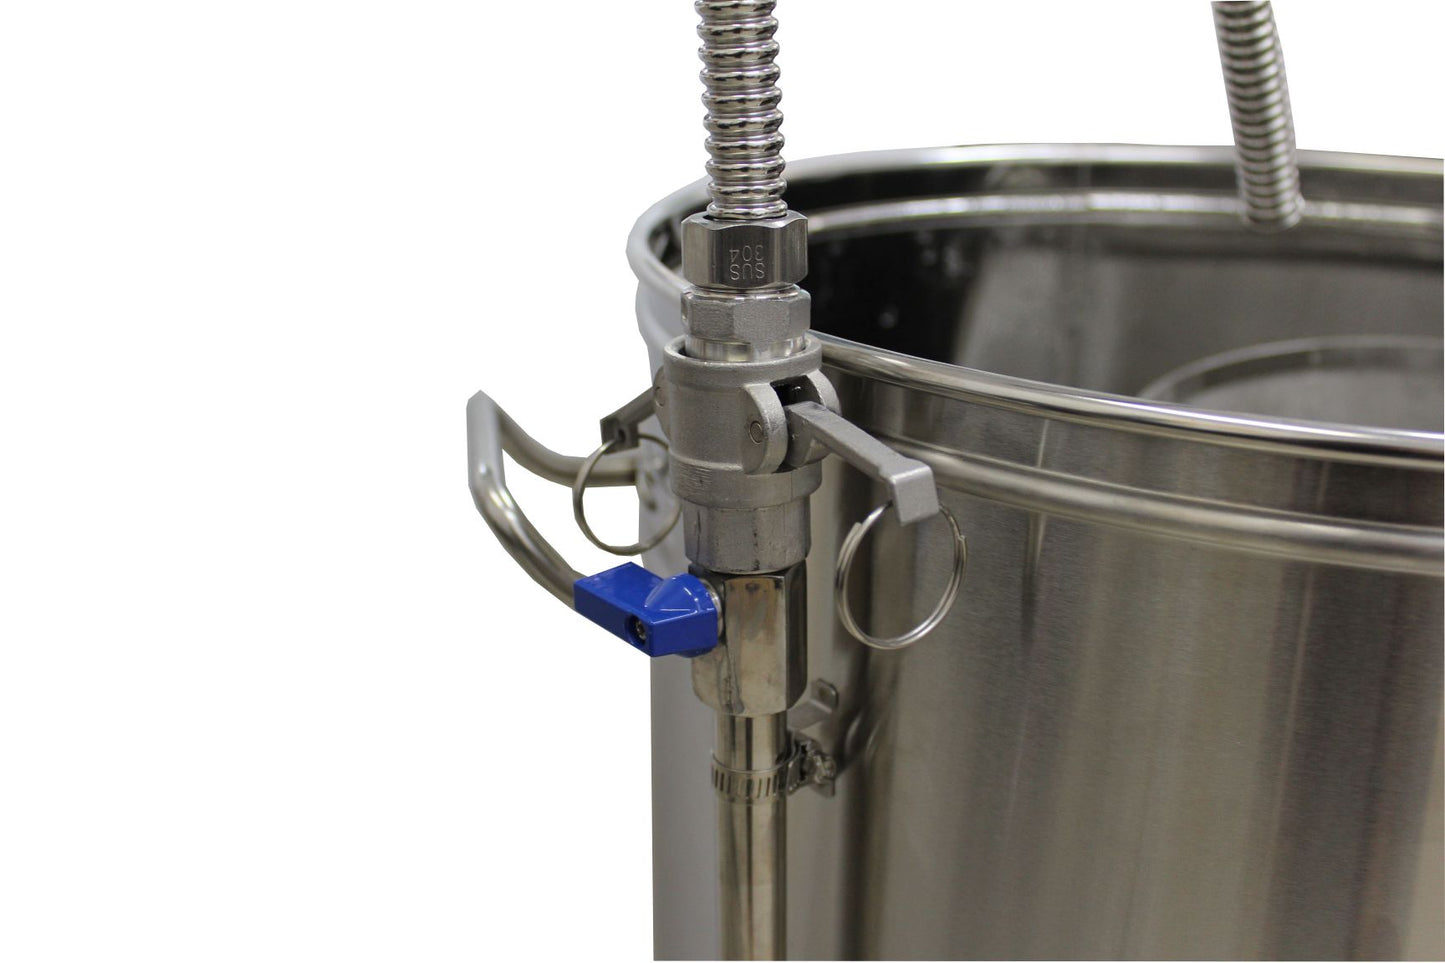 B45L Brewing System PRO +[Extra accessories]